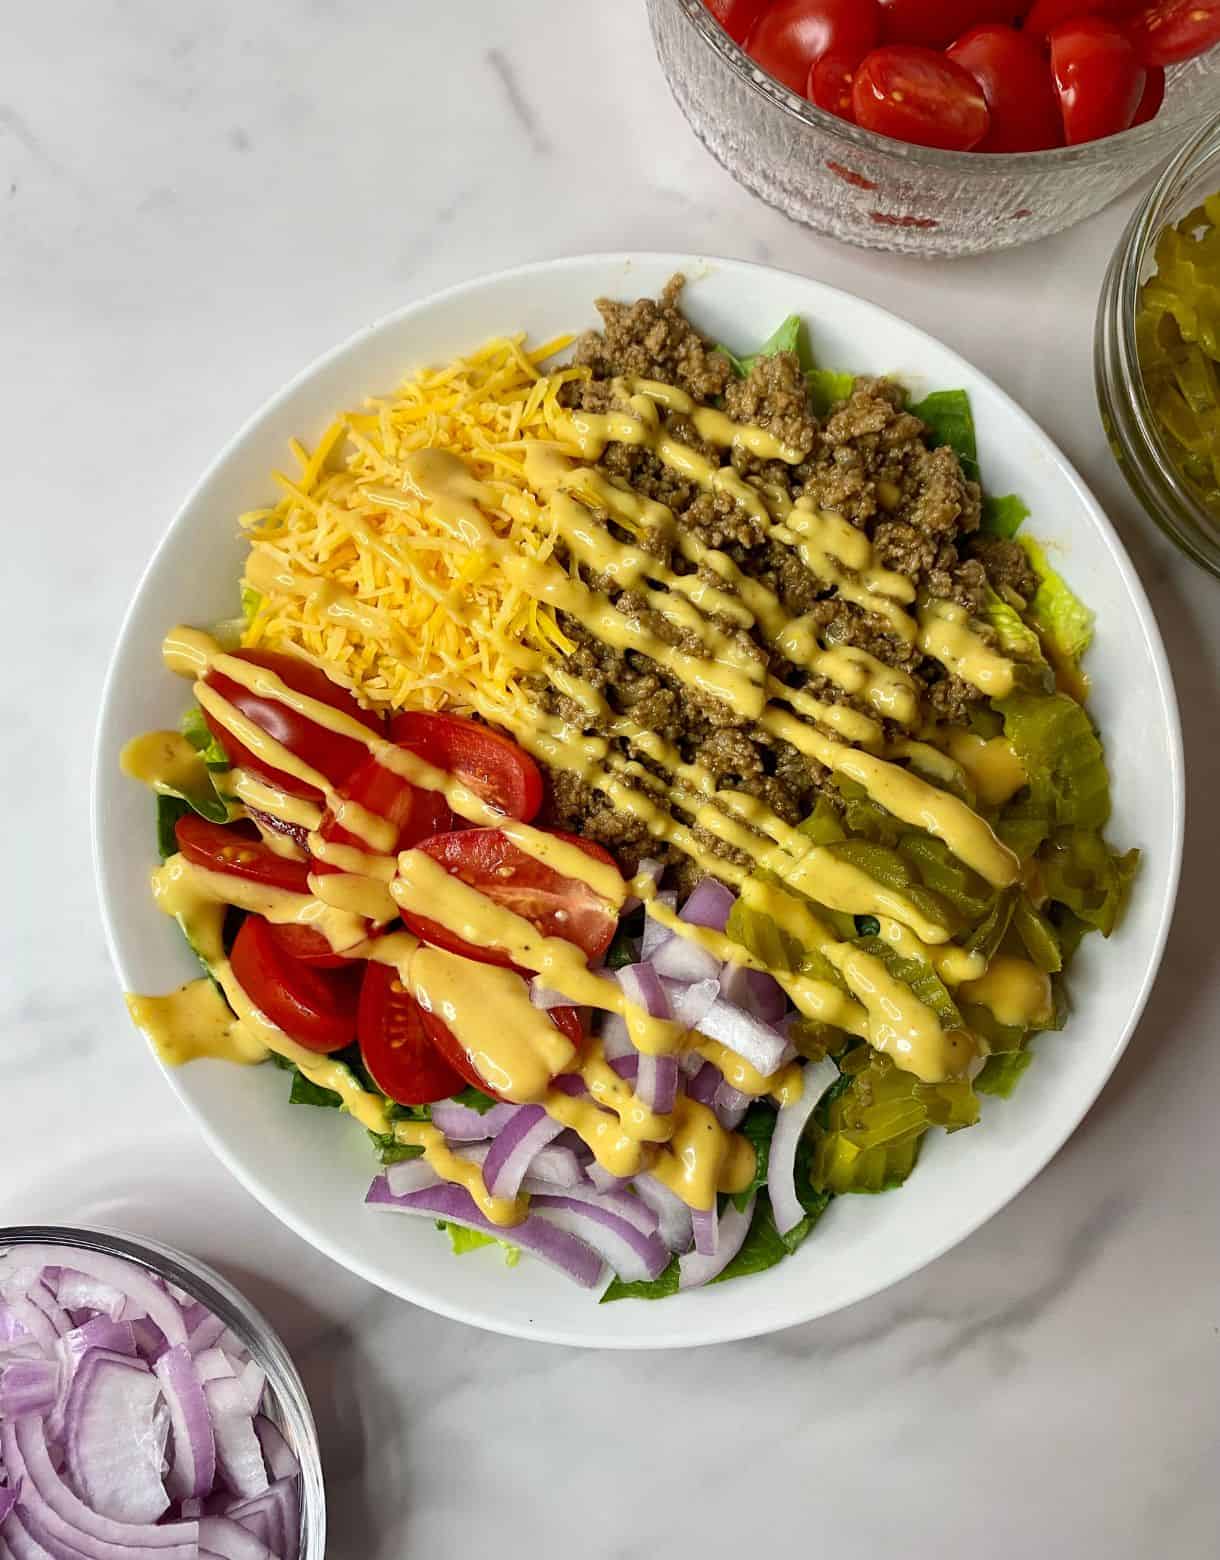 A Burger Bowl with beef, cheese, pickes, lettuce, tomatoes and onions all sprinkled with dressing.